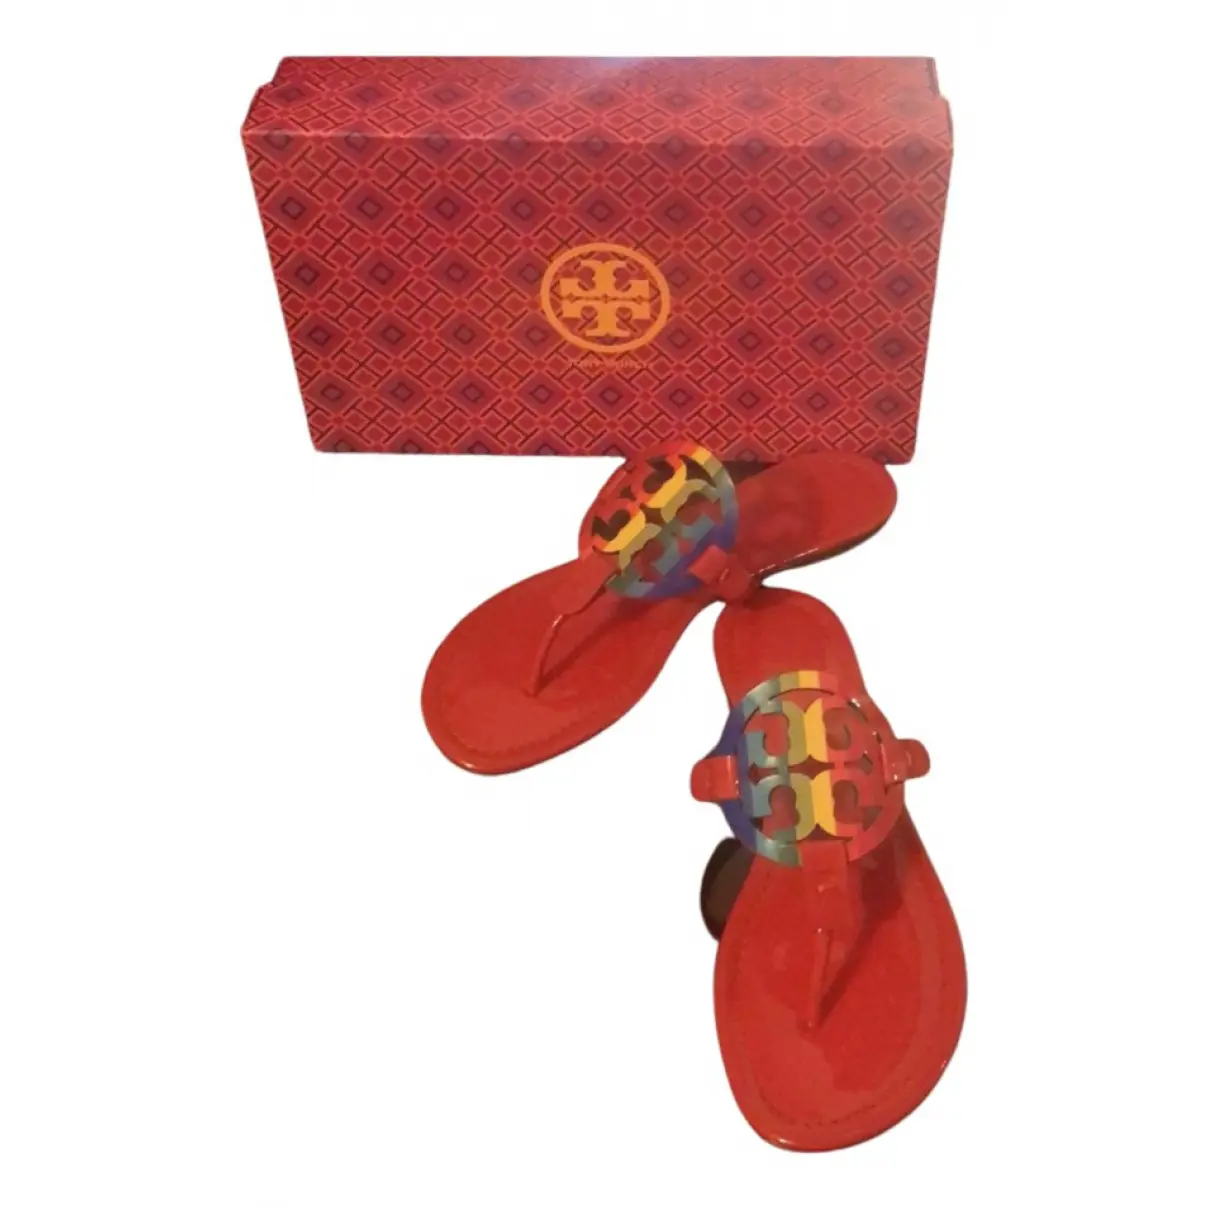 Patent leather sandal Tory Burch